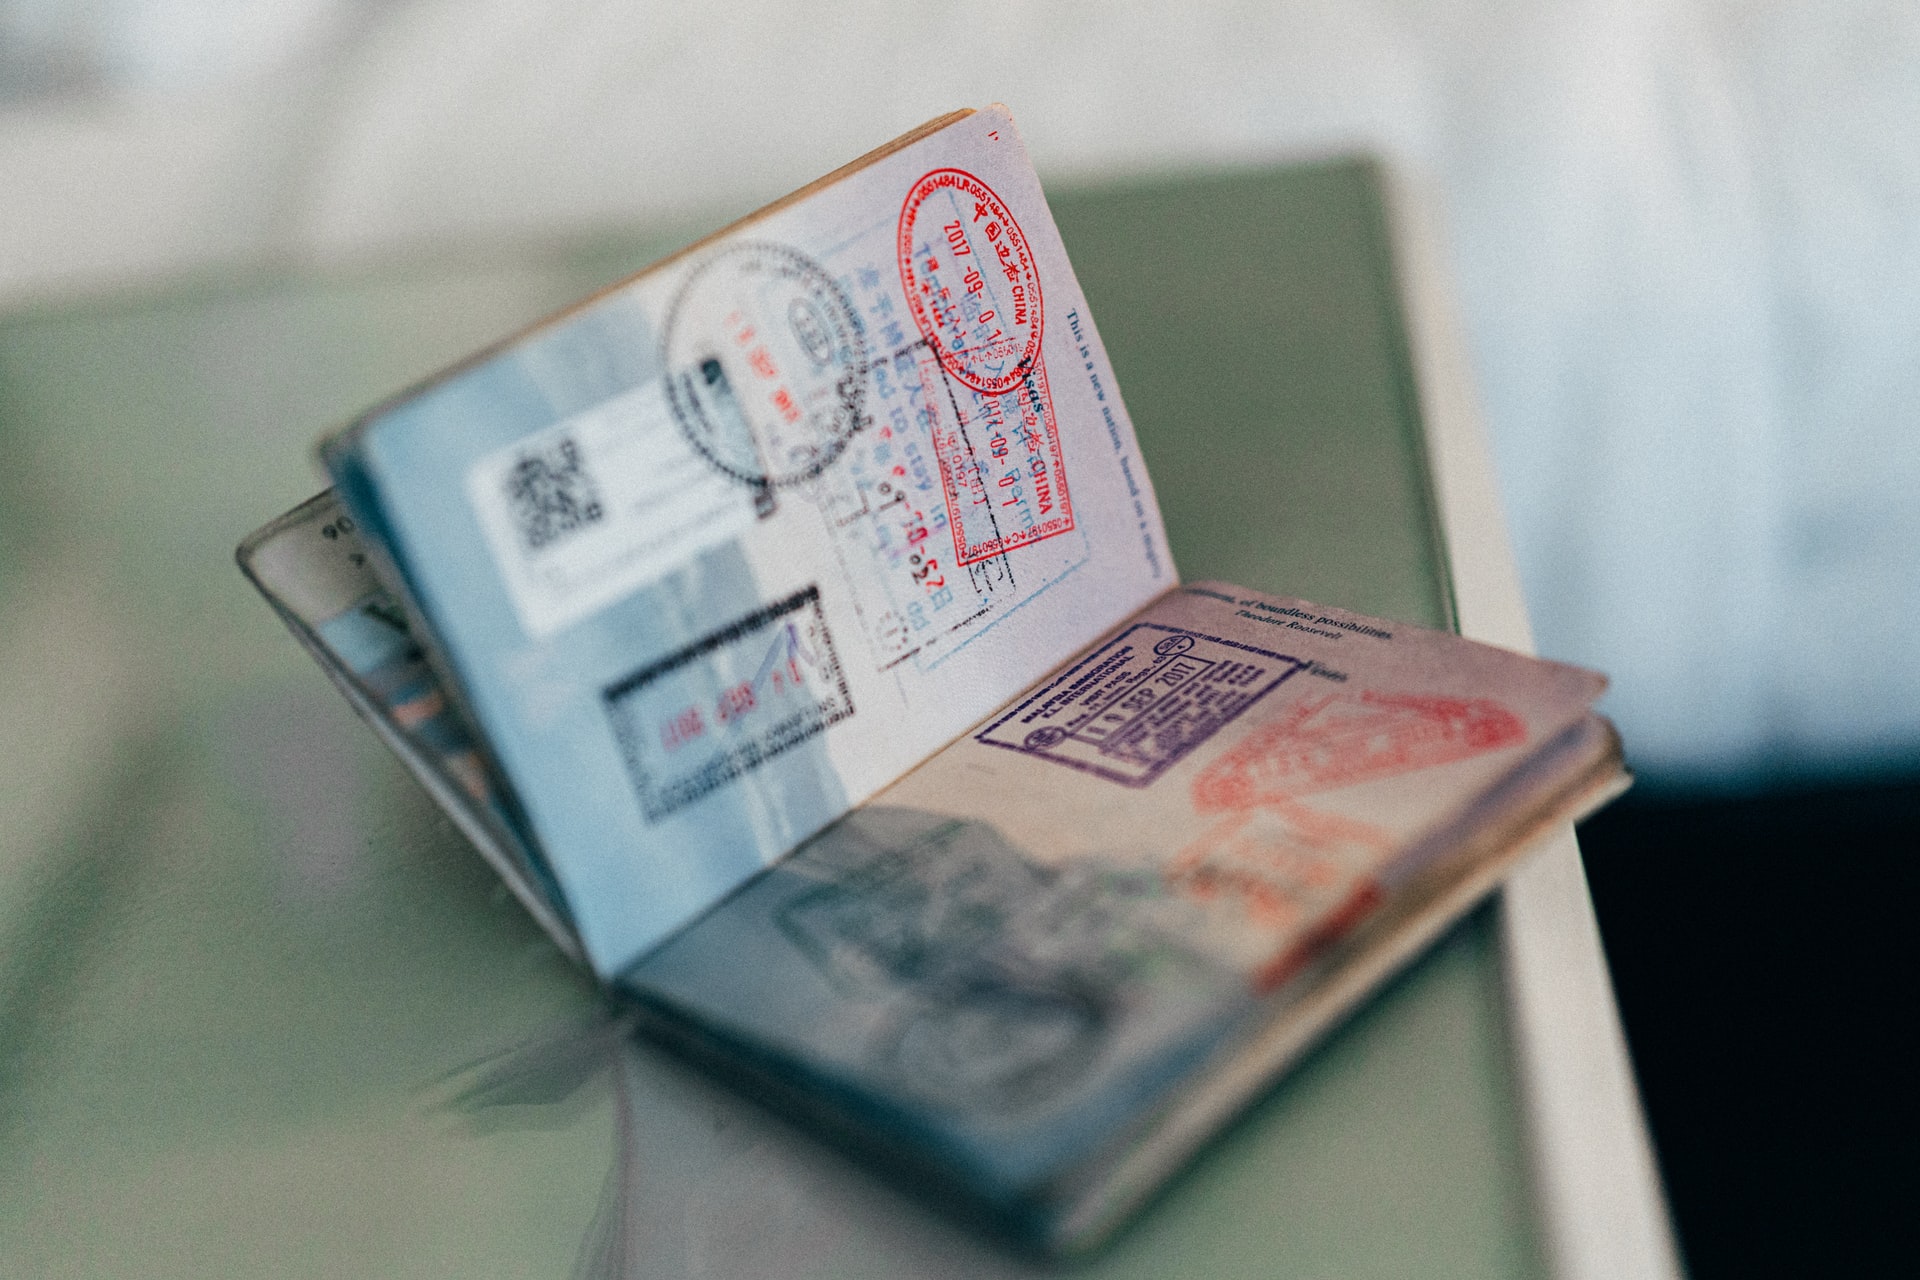 stamped passport placed on a bedside table